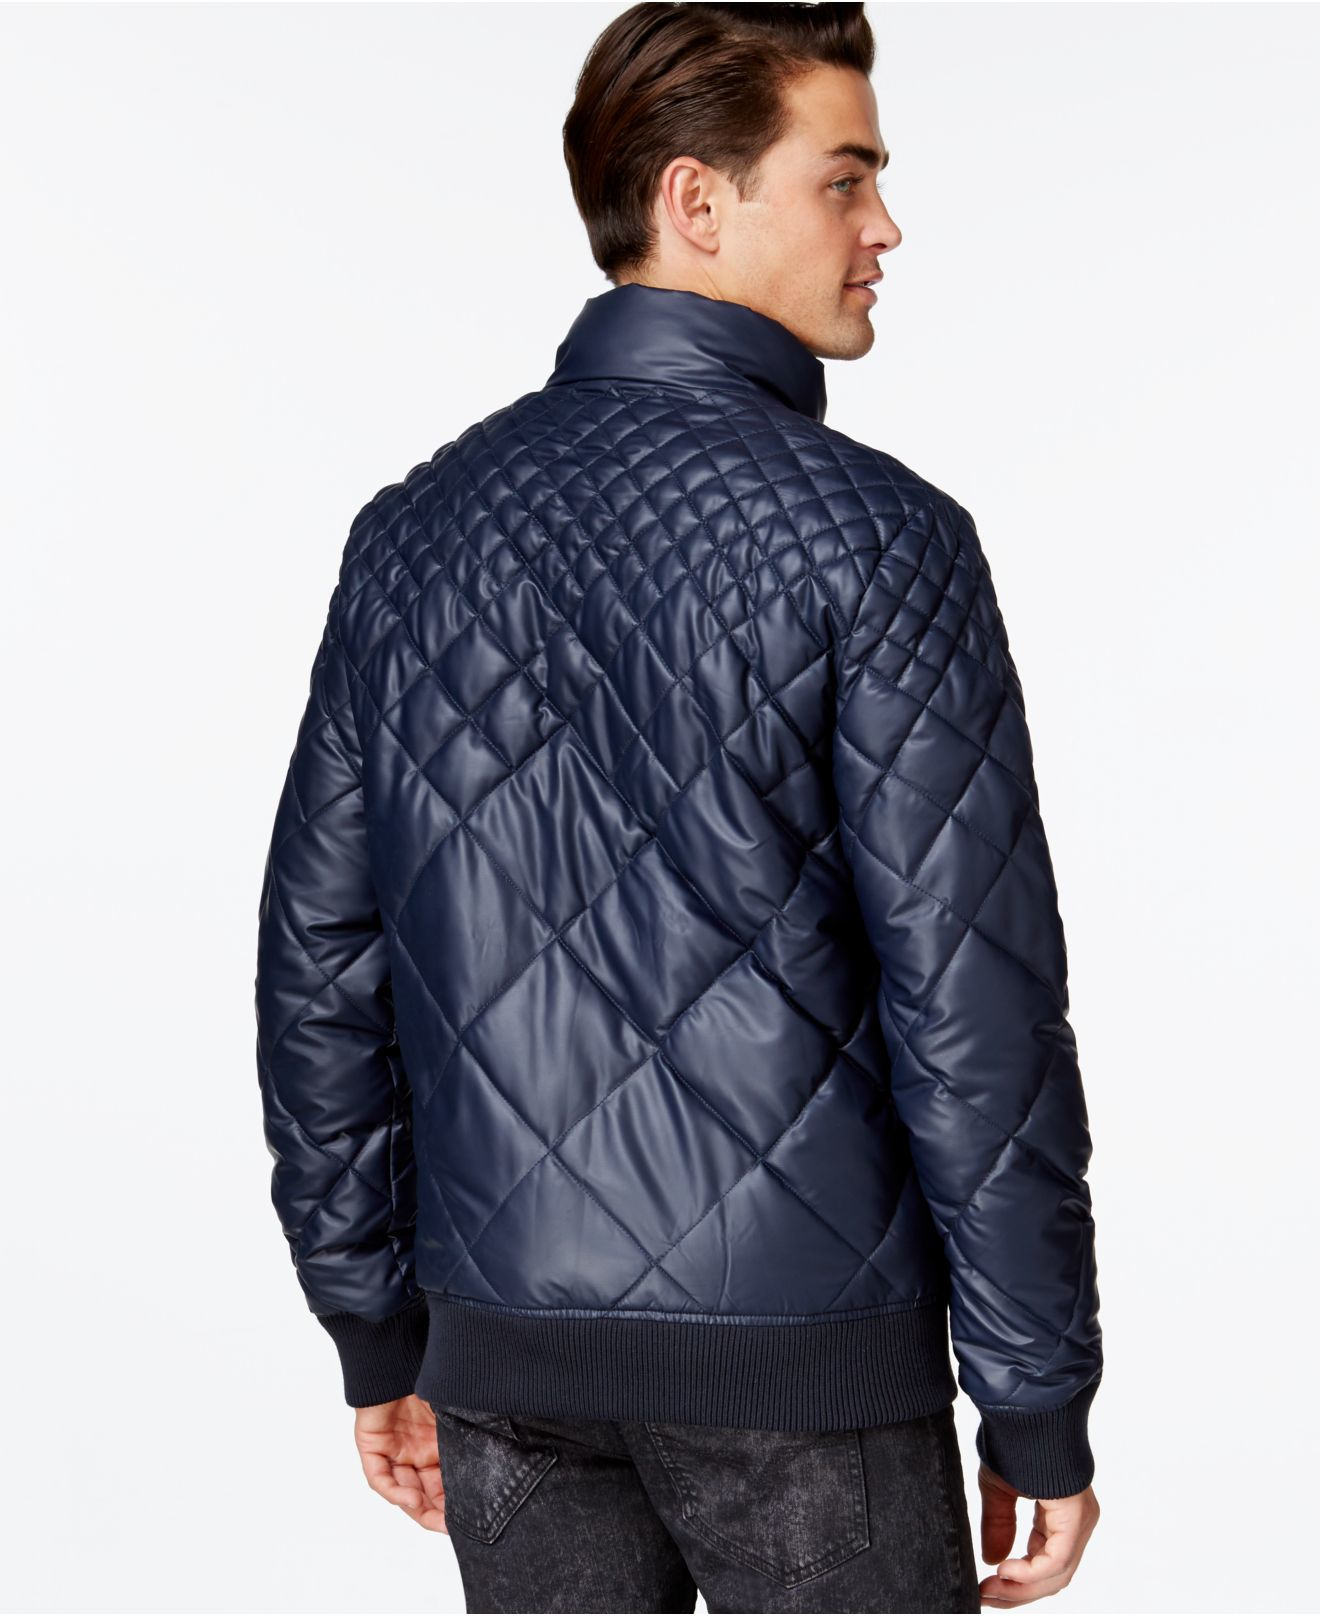 Lyst - Guess John Quilted Puffer Jacket in Blue for Men